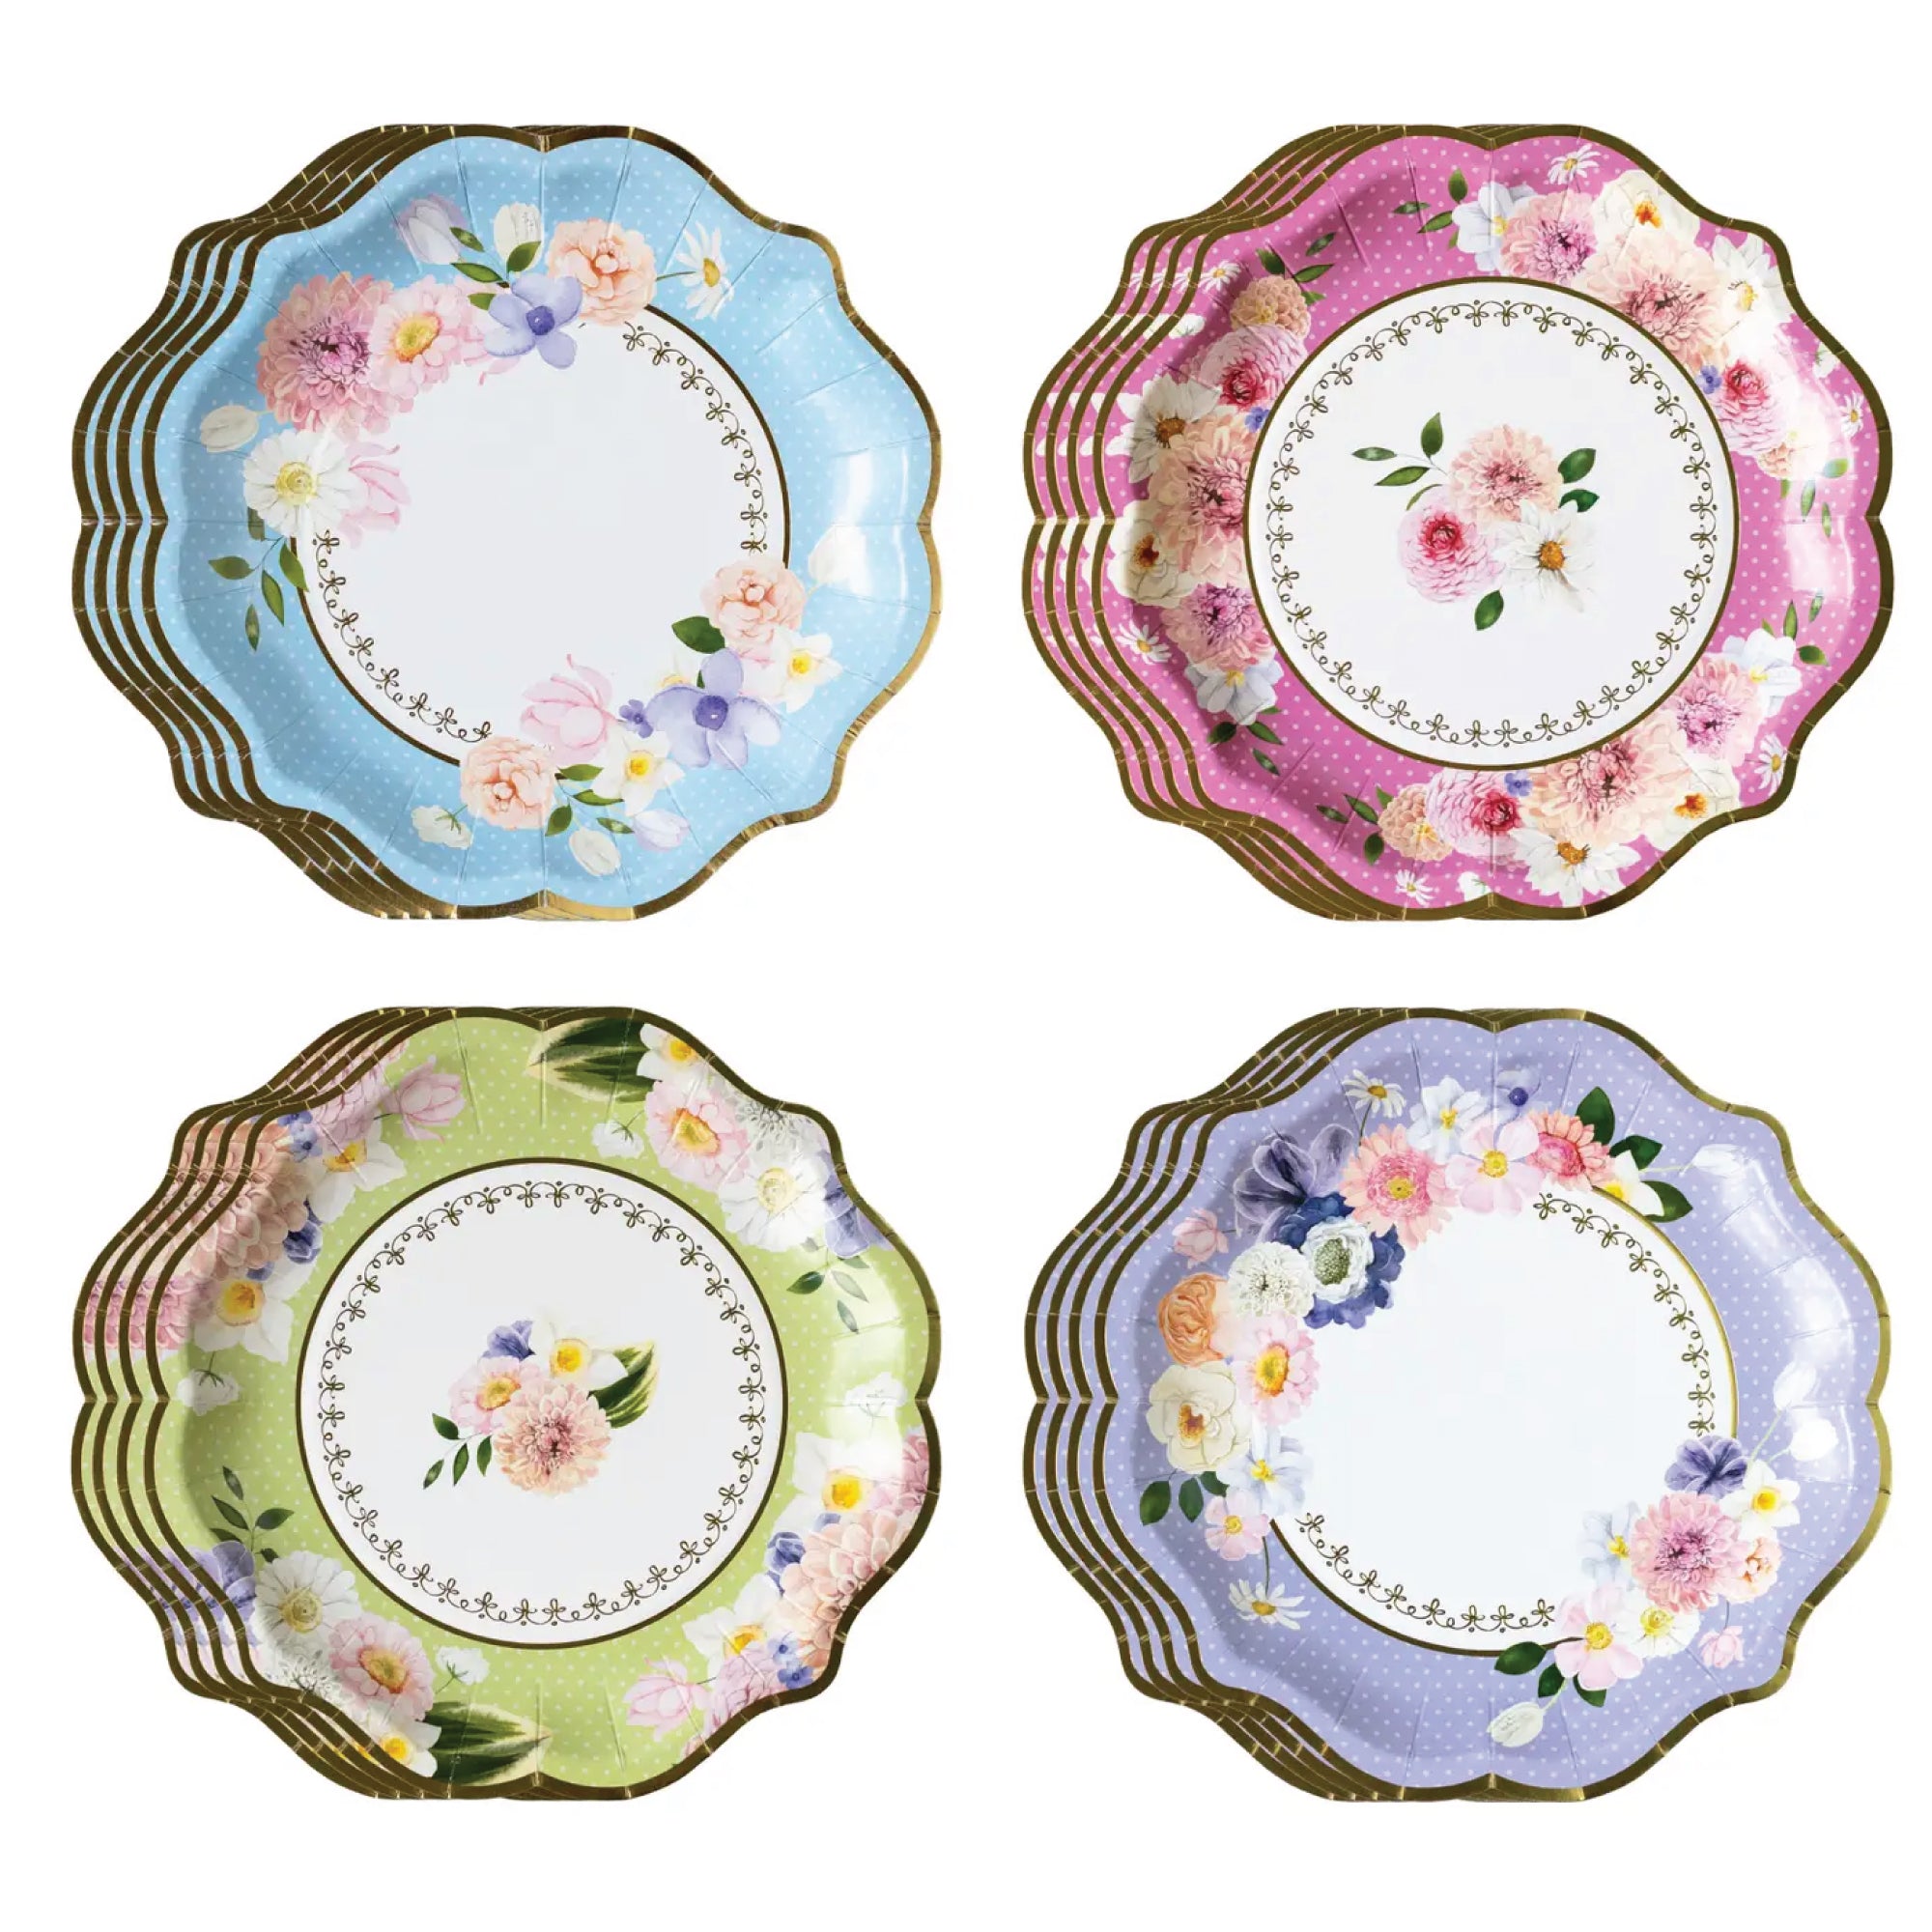 Floral Bridal Shower Scalloped Lunch Plates 16ct